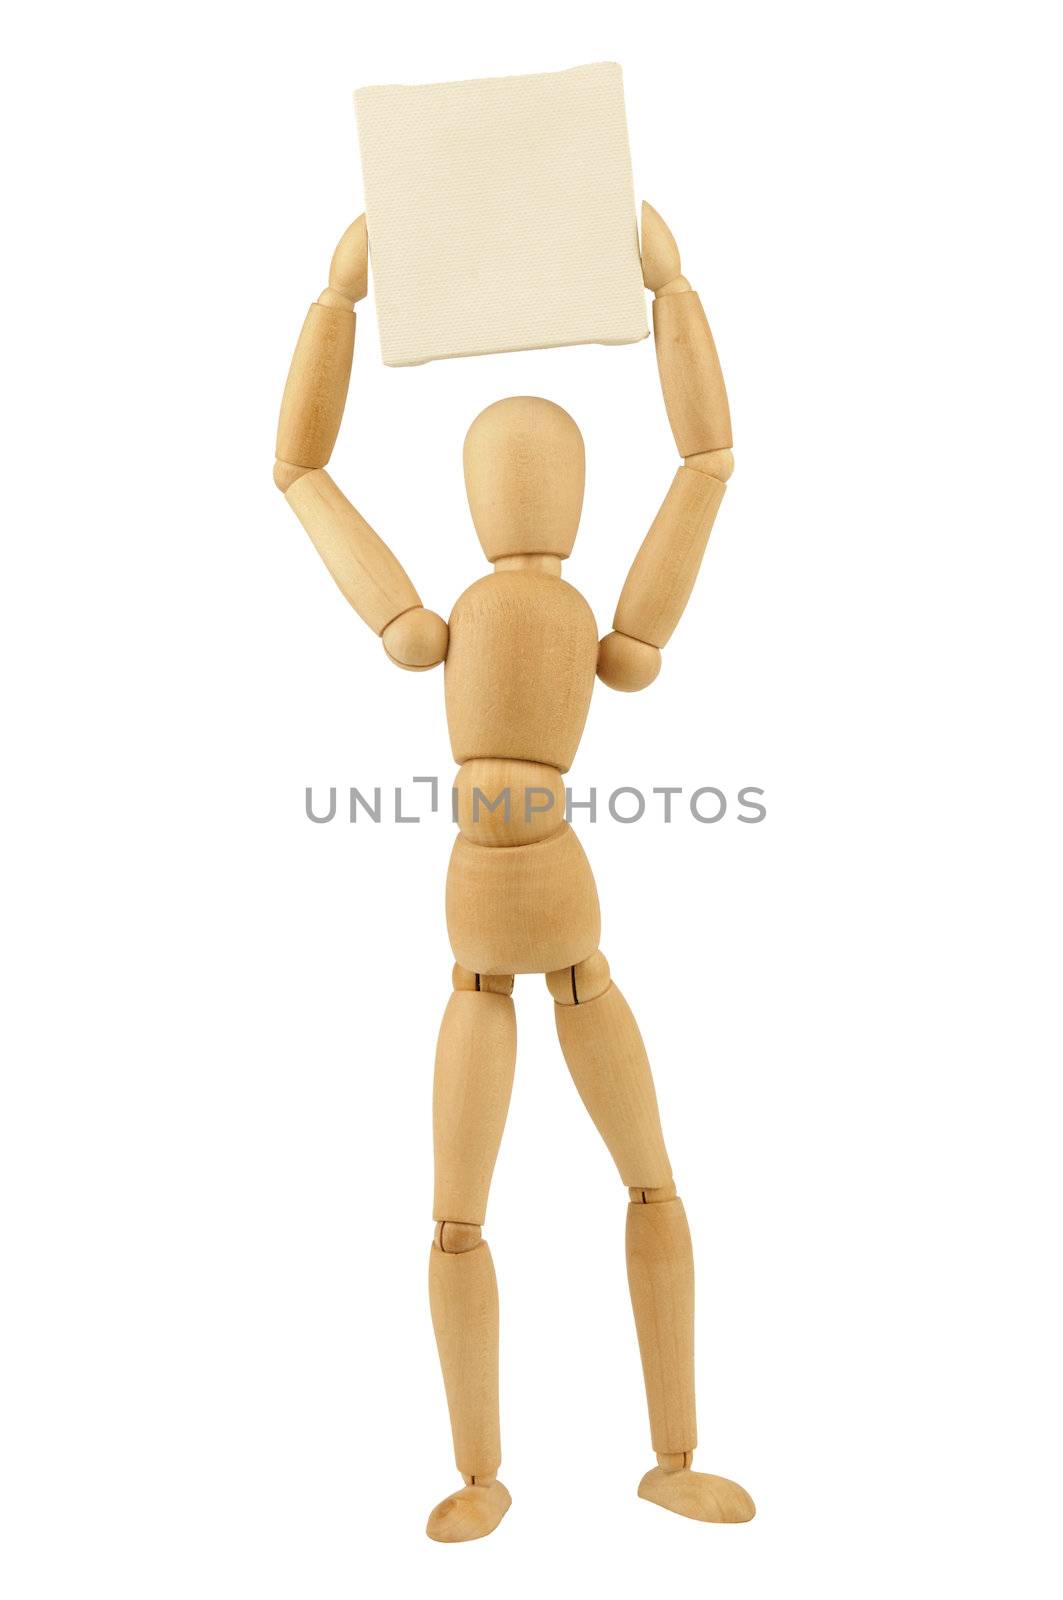  A wooden figurine holding a white  canvas